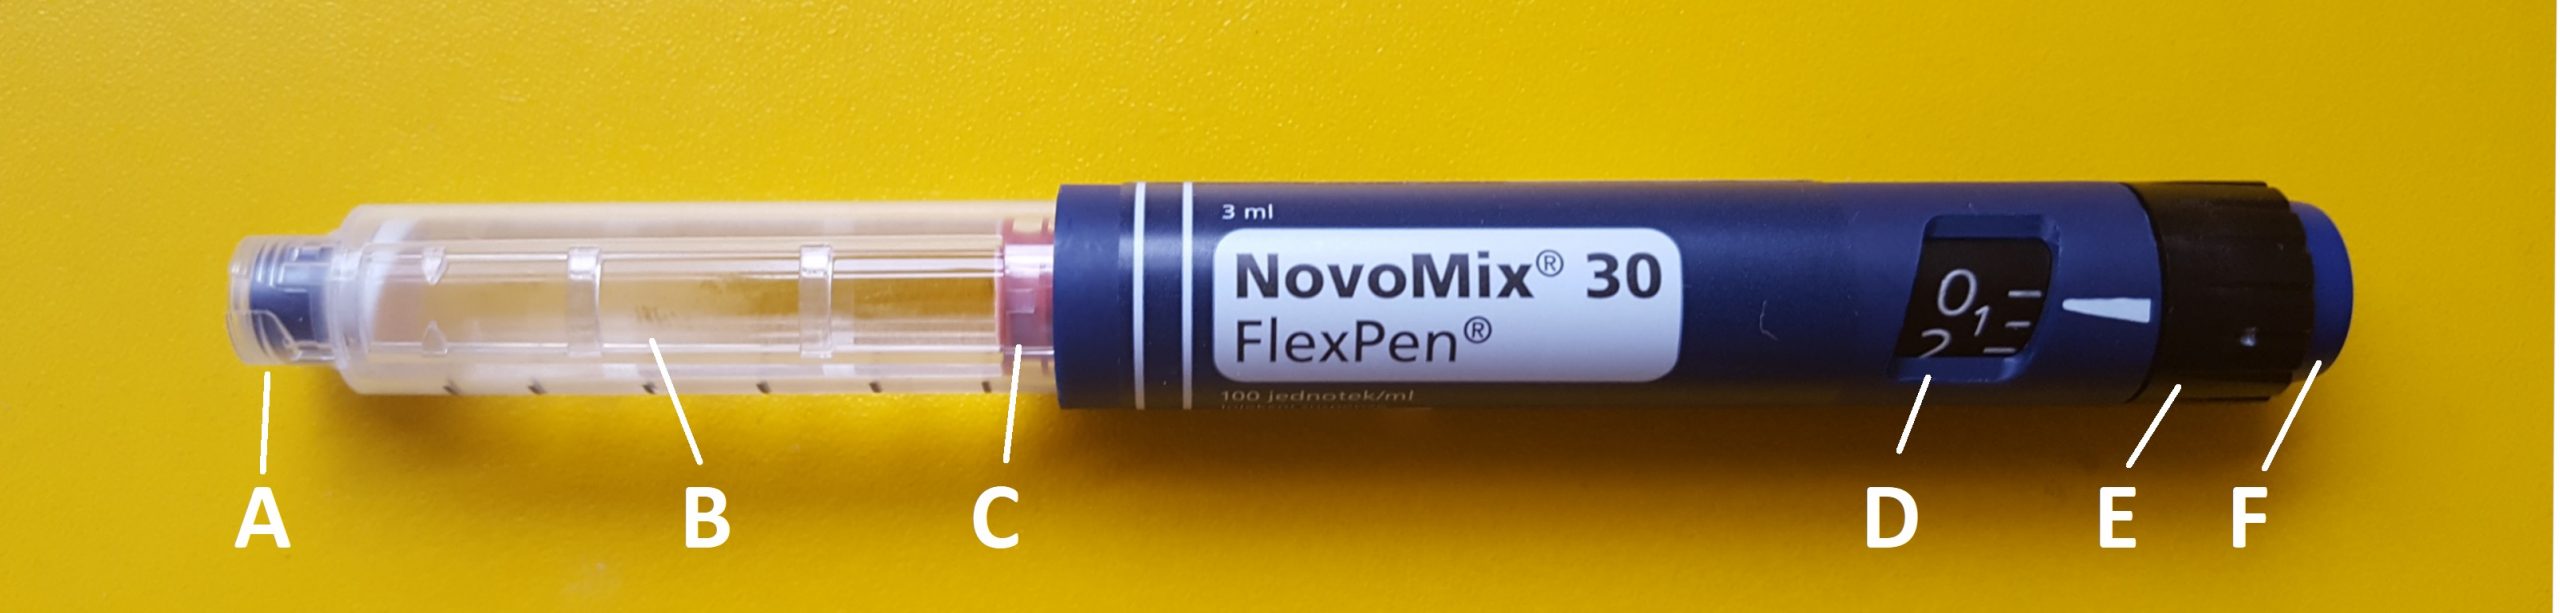 Photo showing closeup of insulin pen, with labels